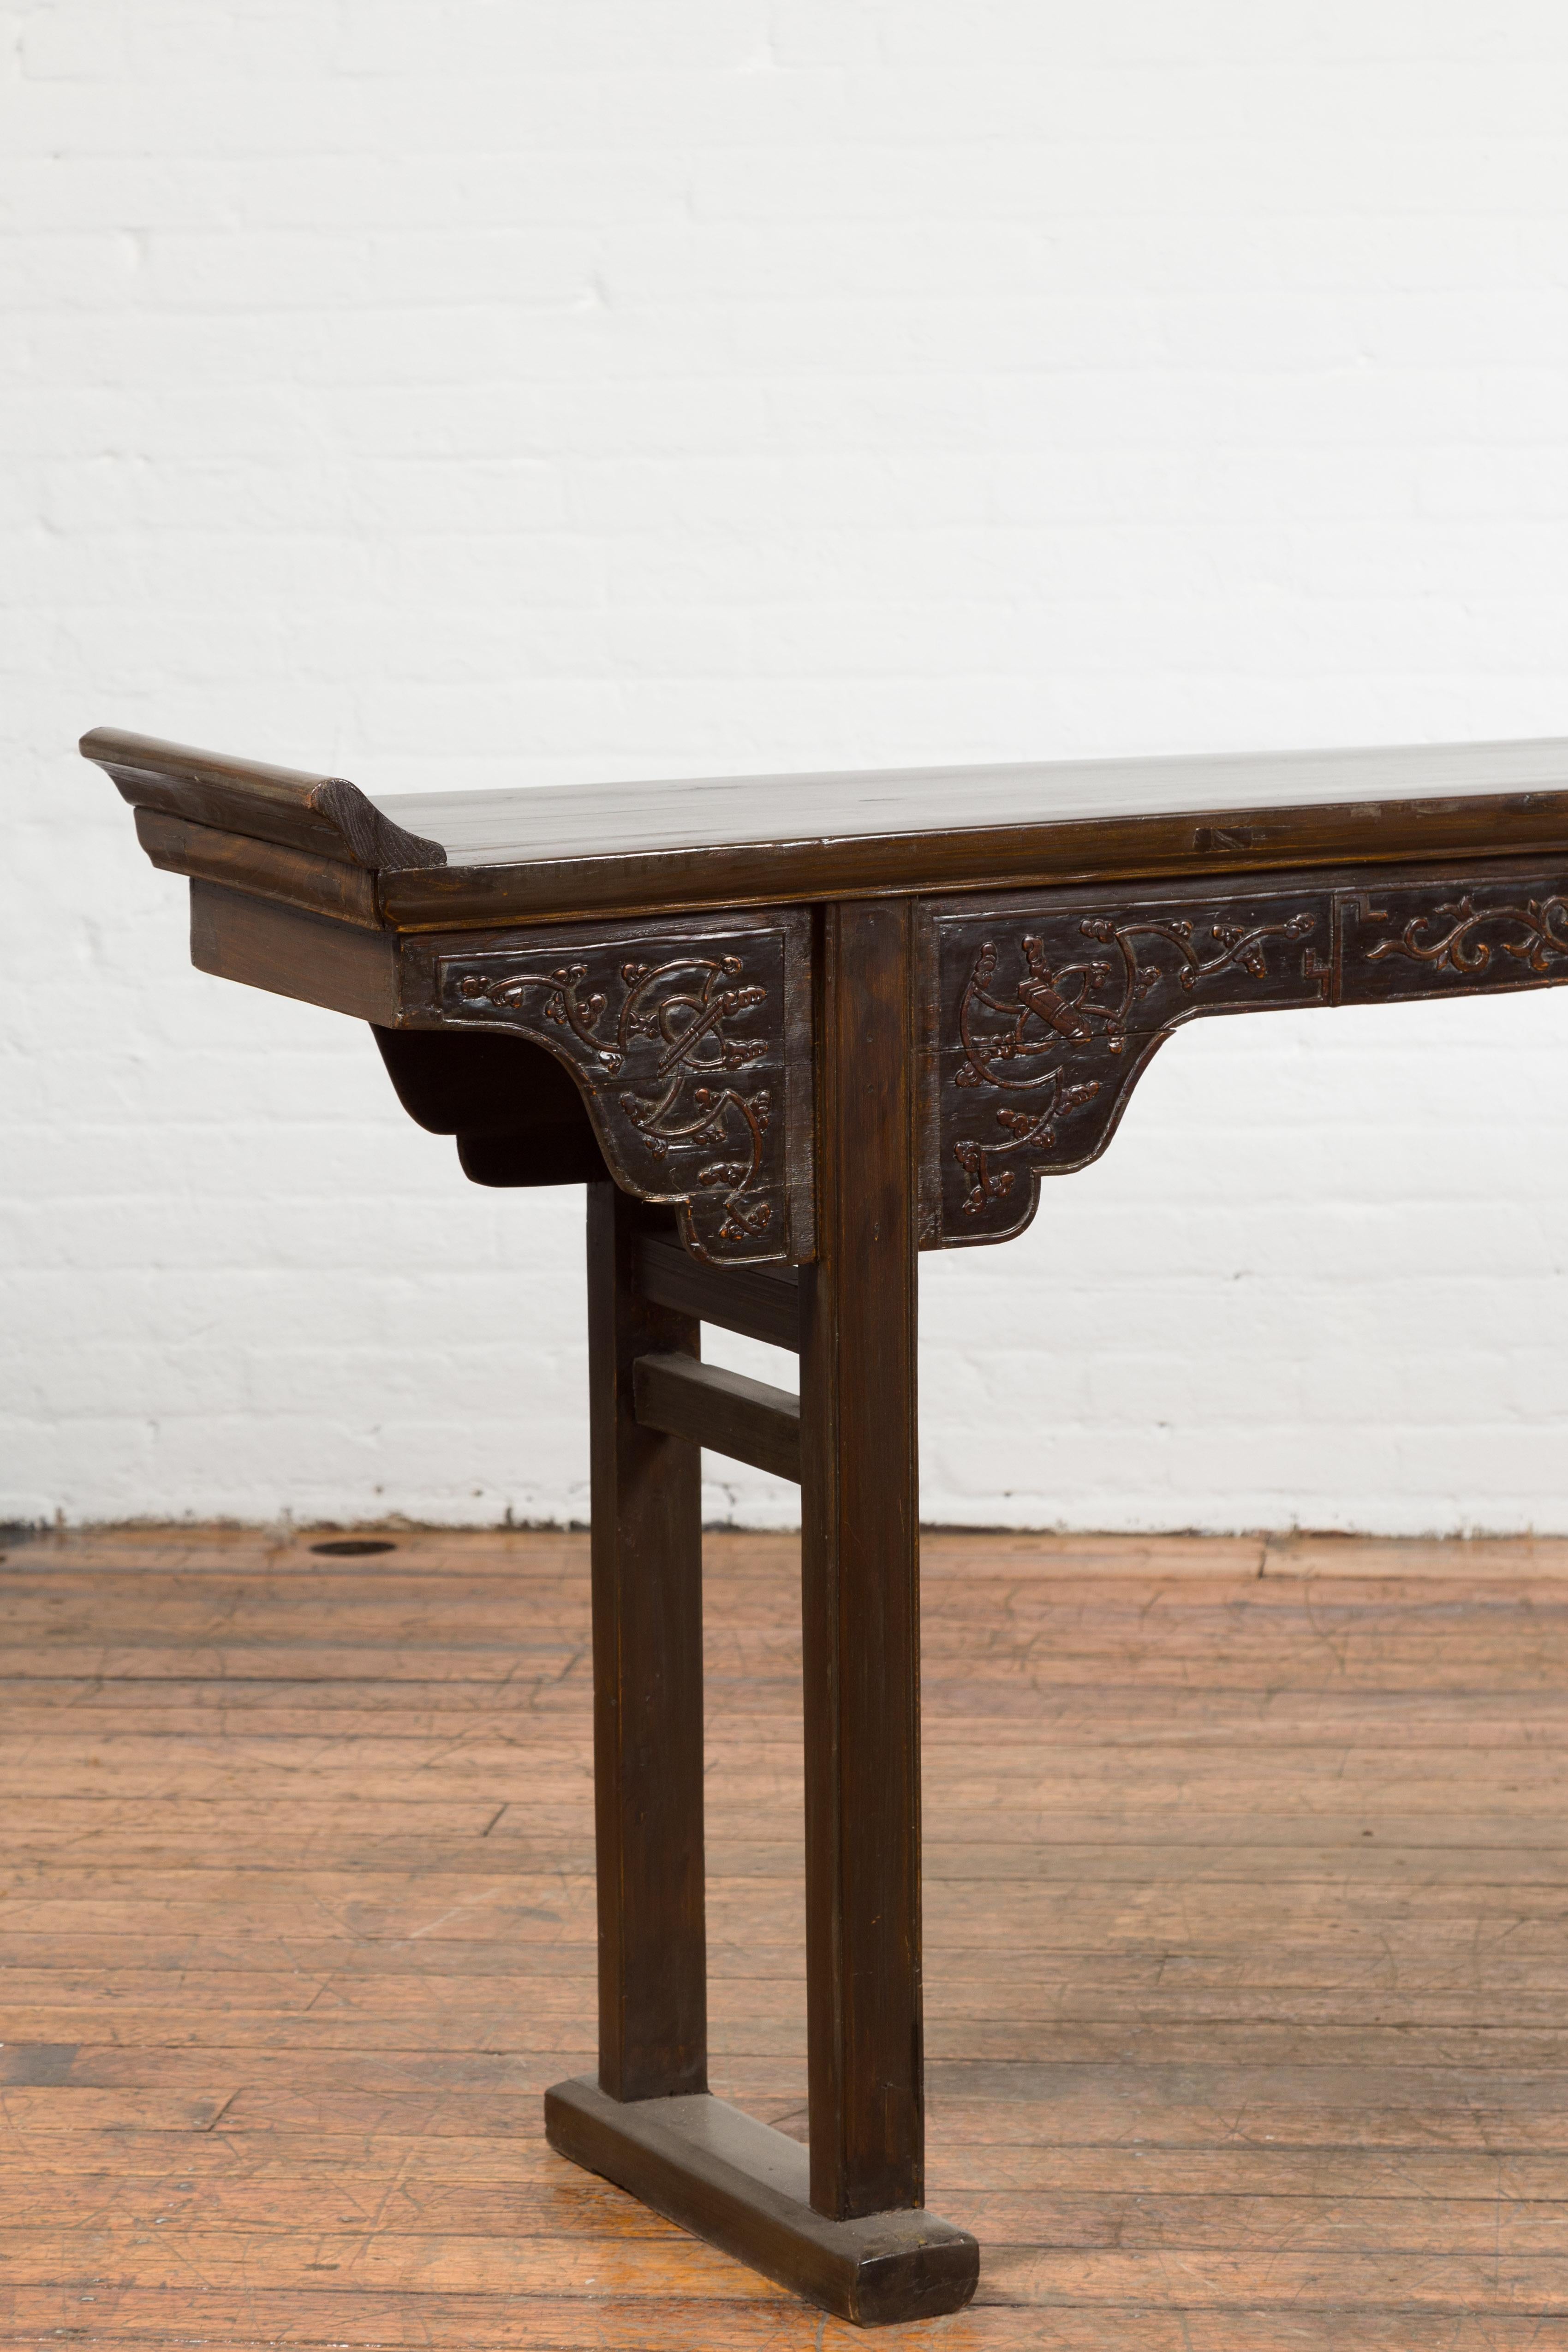 Chinese Qing Dynasty 19th Century Altar Console Table with Foliage-Carved Apron 7